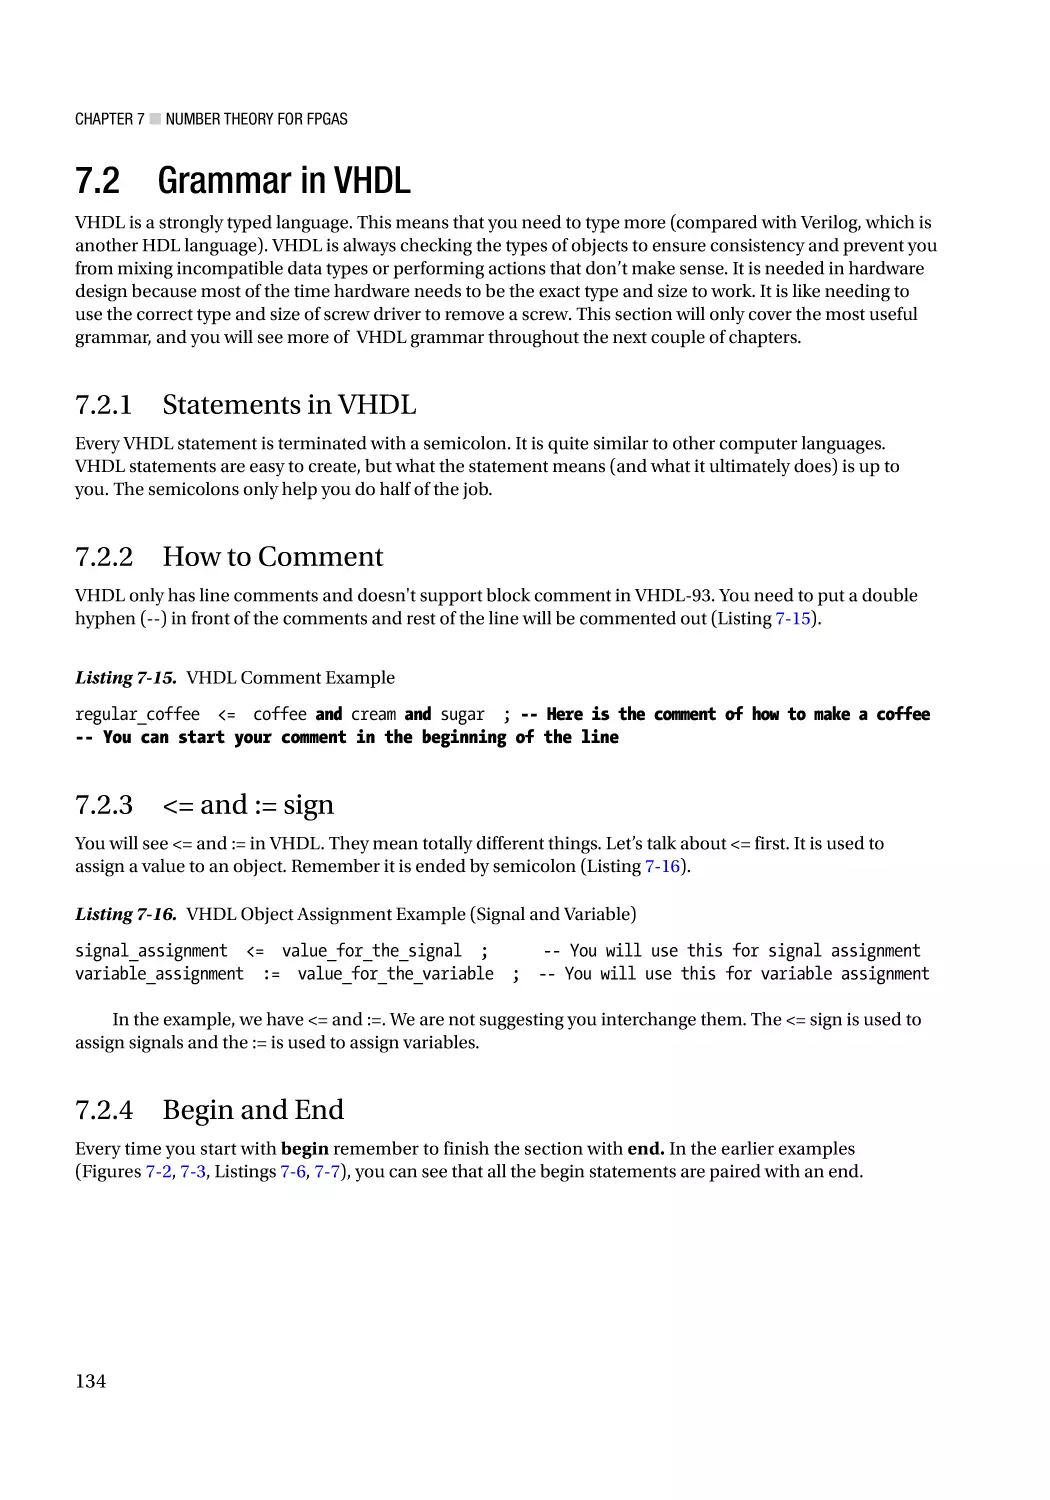 7.2 Grammar in VHDL
7.2.1 Statements in VHDL
7.2.2 How to Comment
7.2.3 <= and
7.2.4 Begin and End